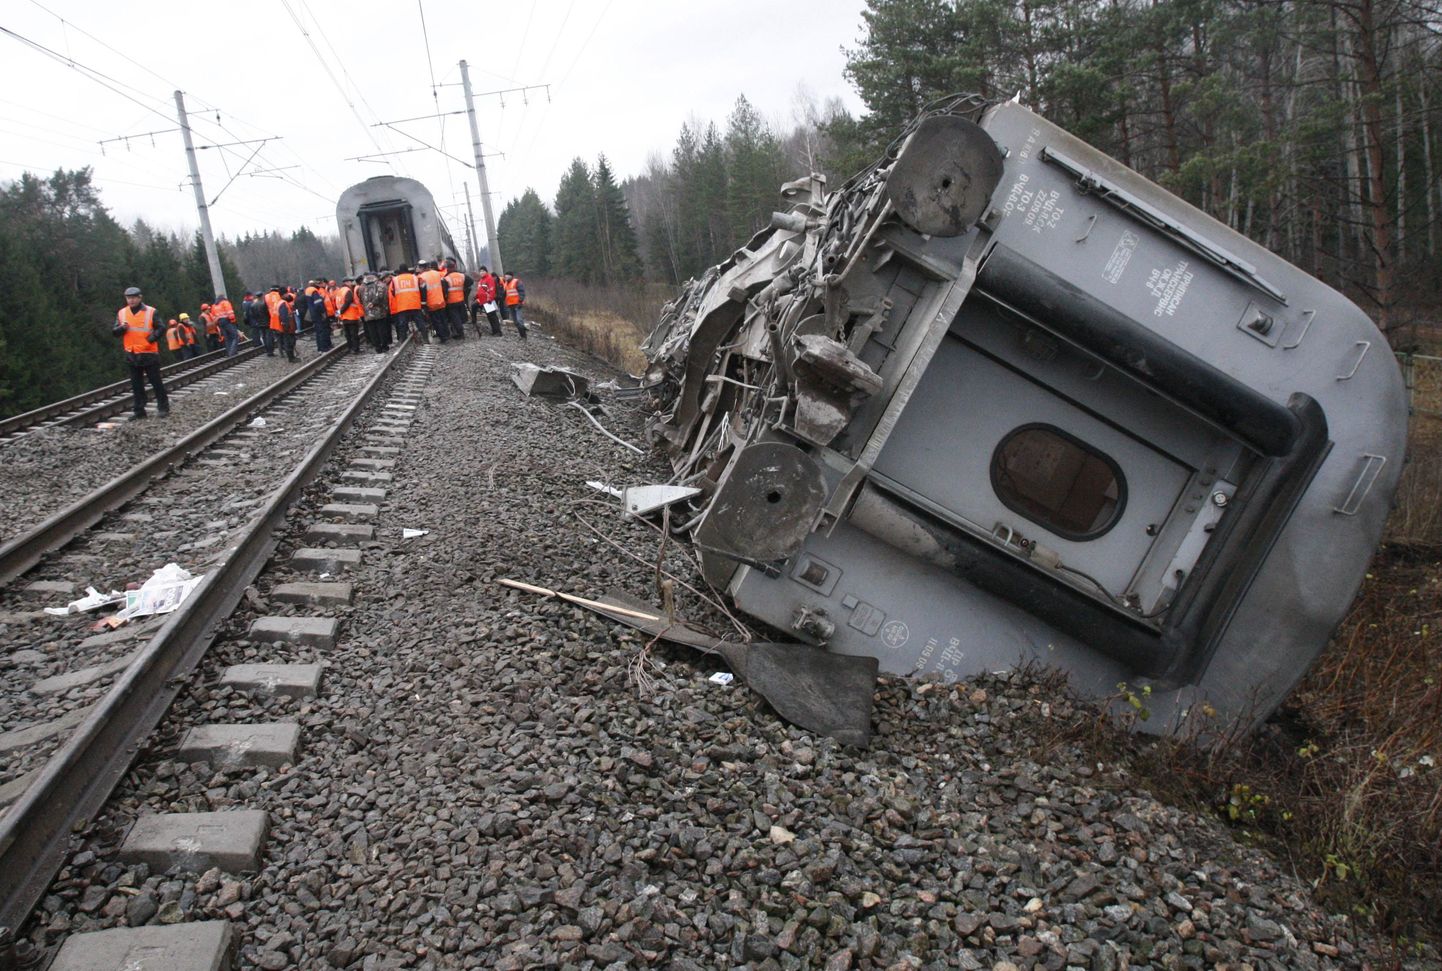 Railroad workers stand next to a damaged coach at the site of a train derailment near the town of Uglovka, some 400 km (250 miles) north-east of Moscow, Russia, Saturday, Nov. 28, 2009. An express train carrying hundreds of passengers from Moscow to St. Petersburg derailed, killing dozens of people and injuring scores of others in what may have been an act of sabotage, Russian officials said. (AP Photo/Ivan Sekretarev) / SCANPIX Code: 436